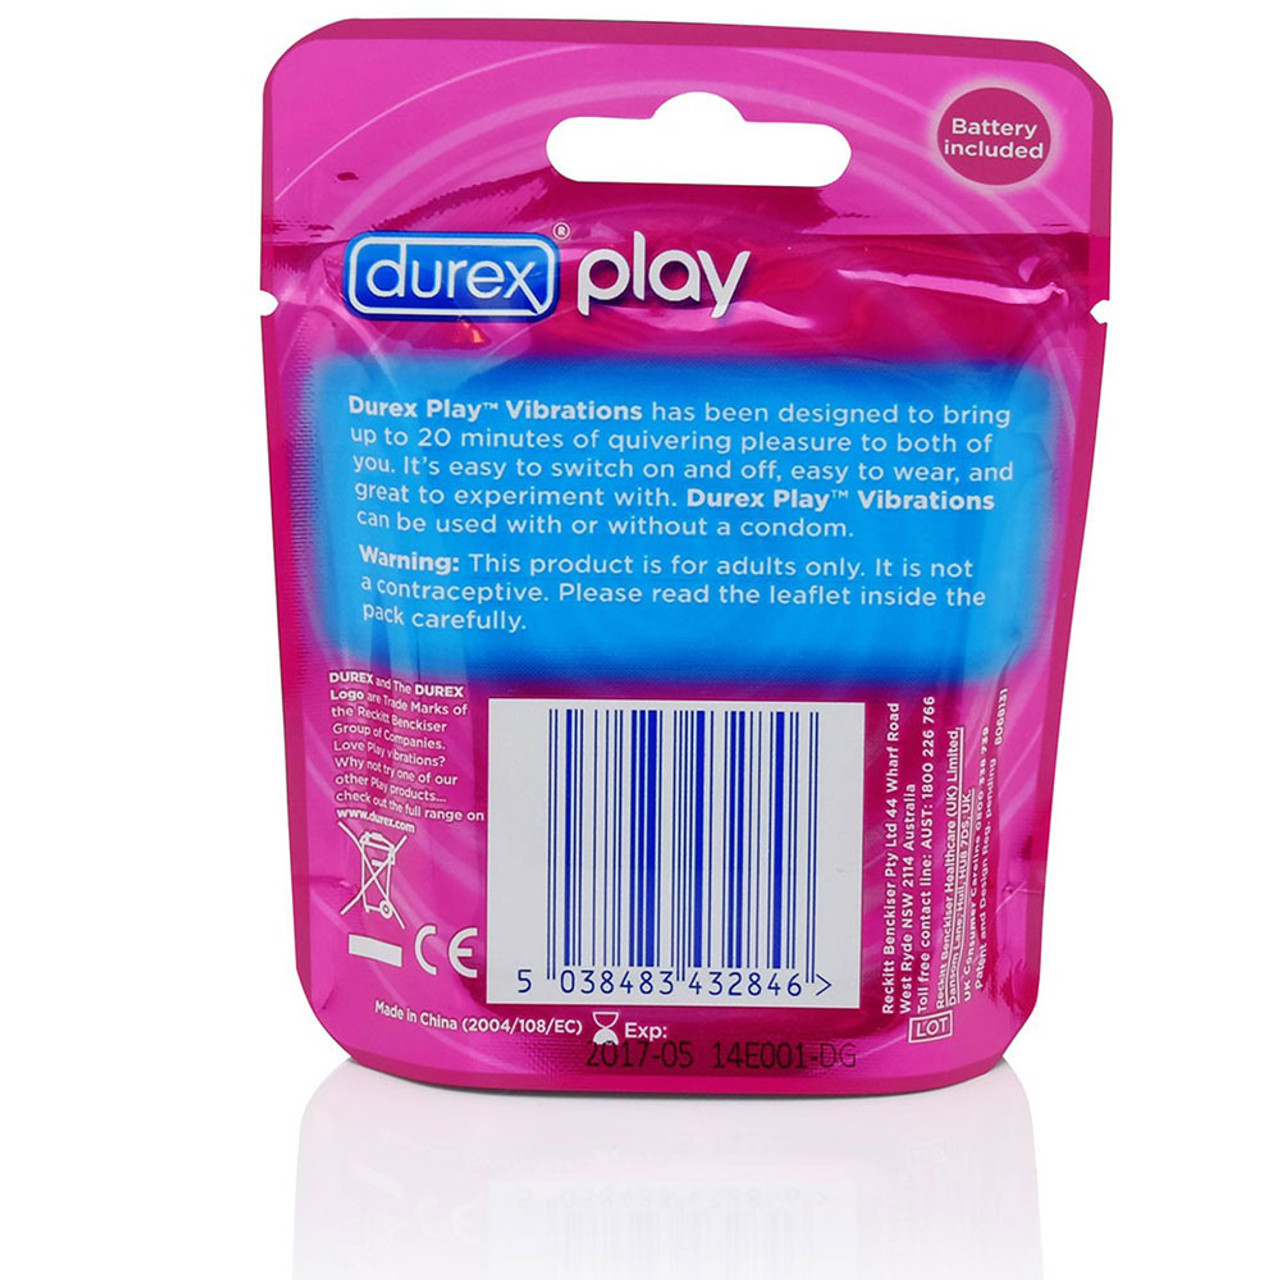 durex play vibrations ring back pack 78158.1524056547